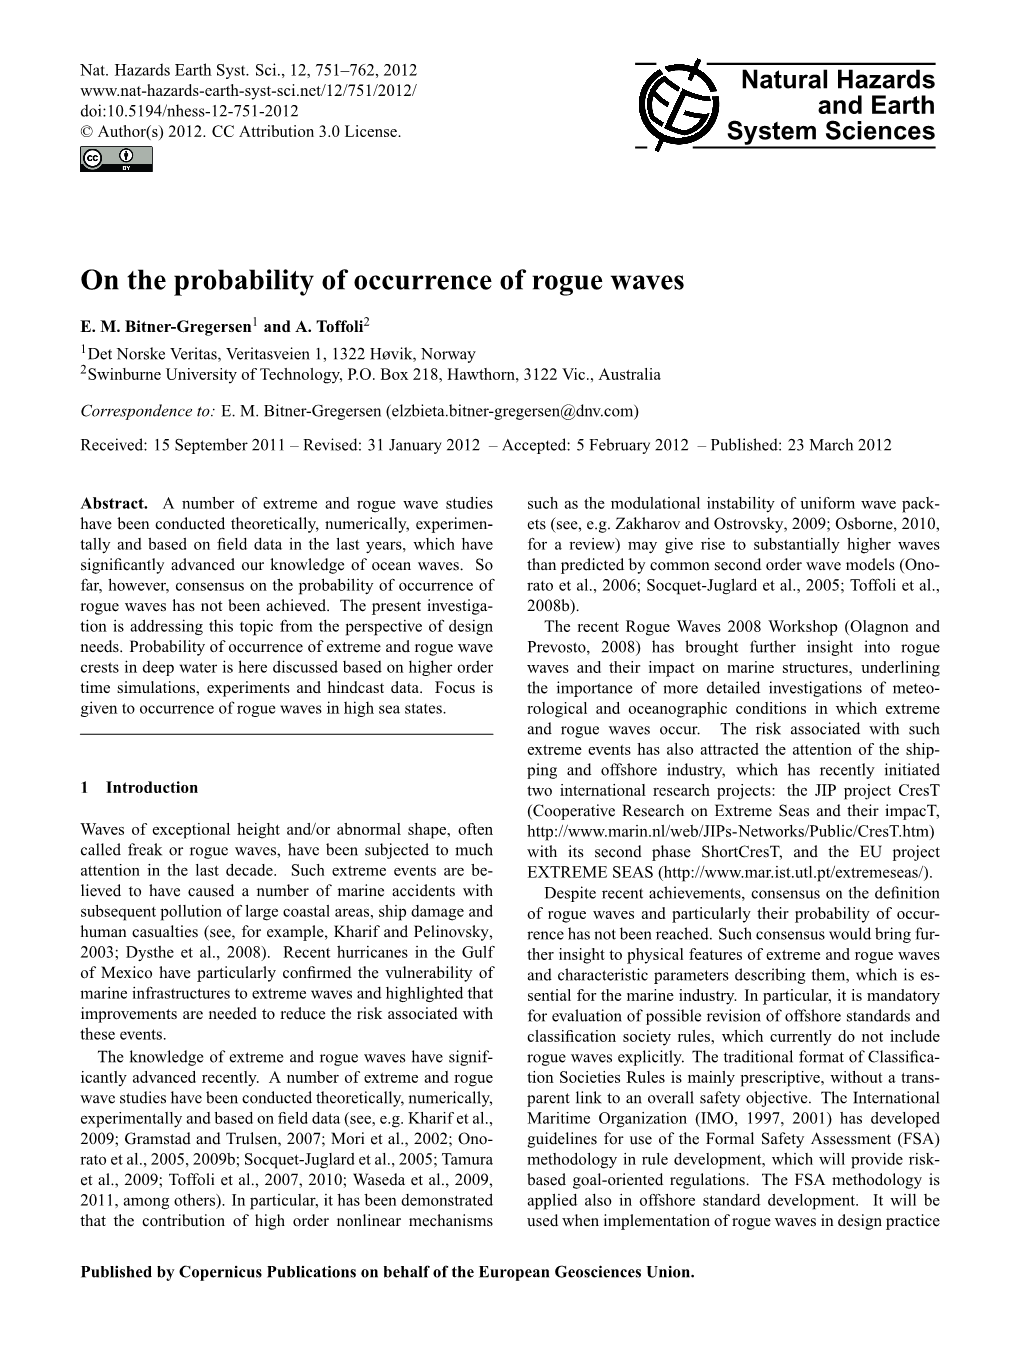 On the Probability of Occurrence of Rogue Waves